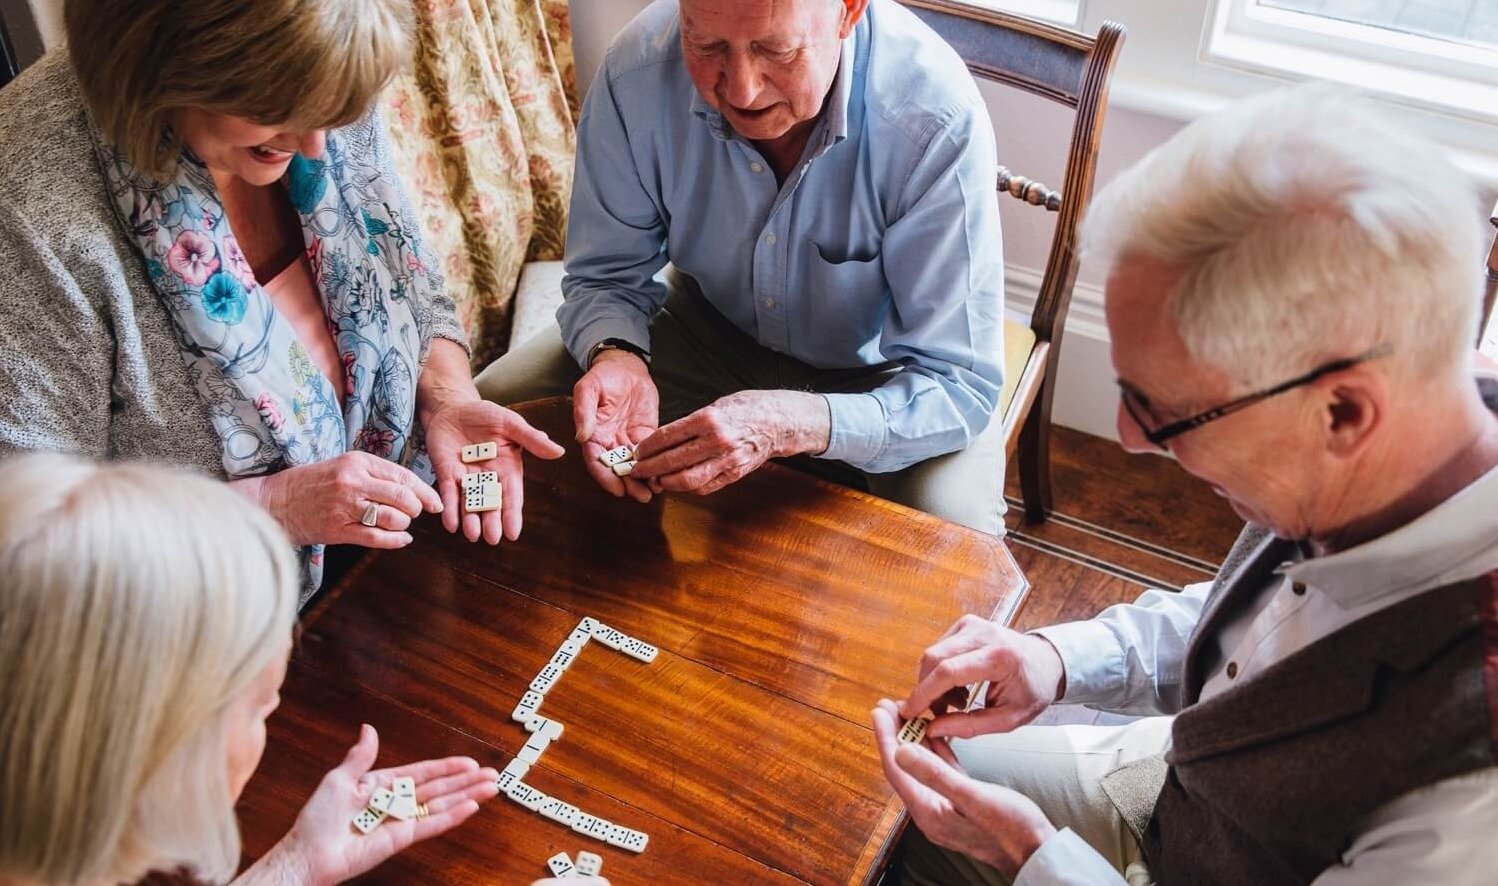 A group of four seniors playing dominos